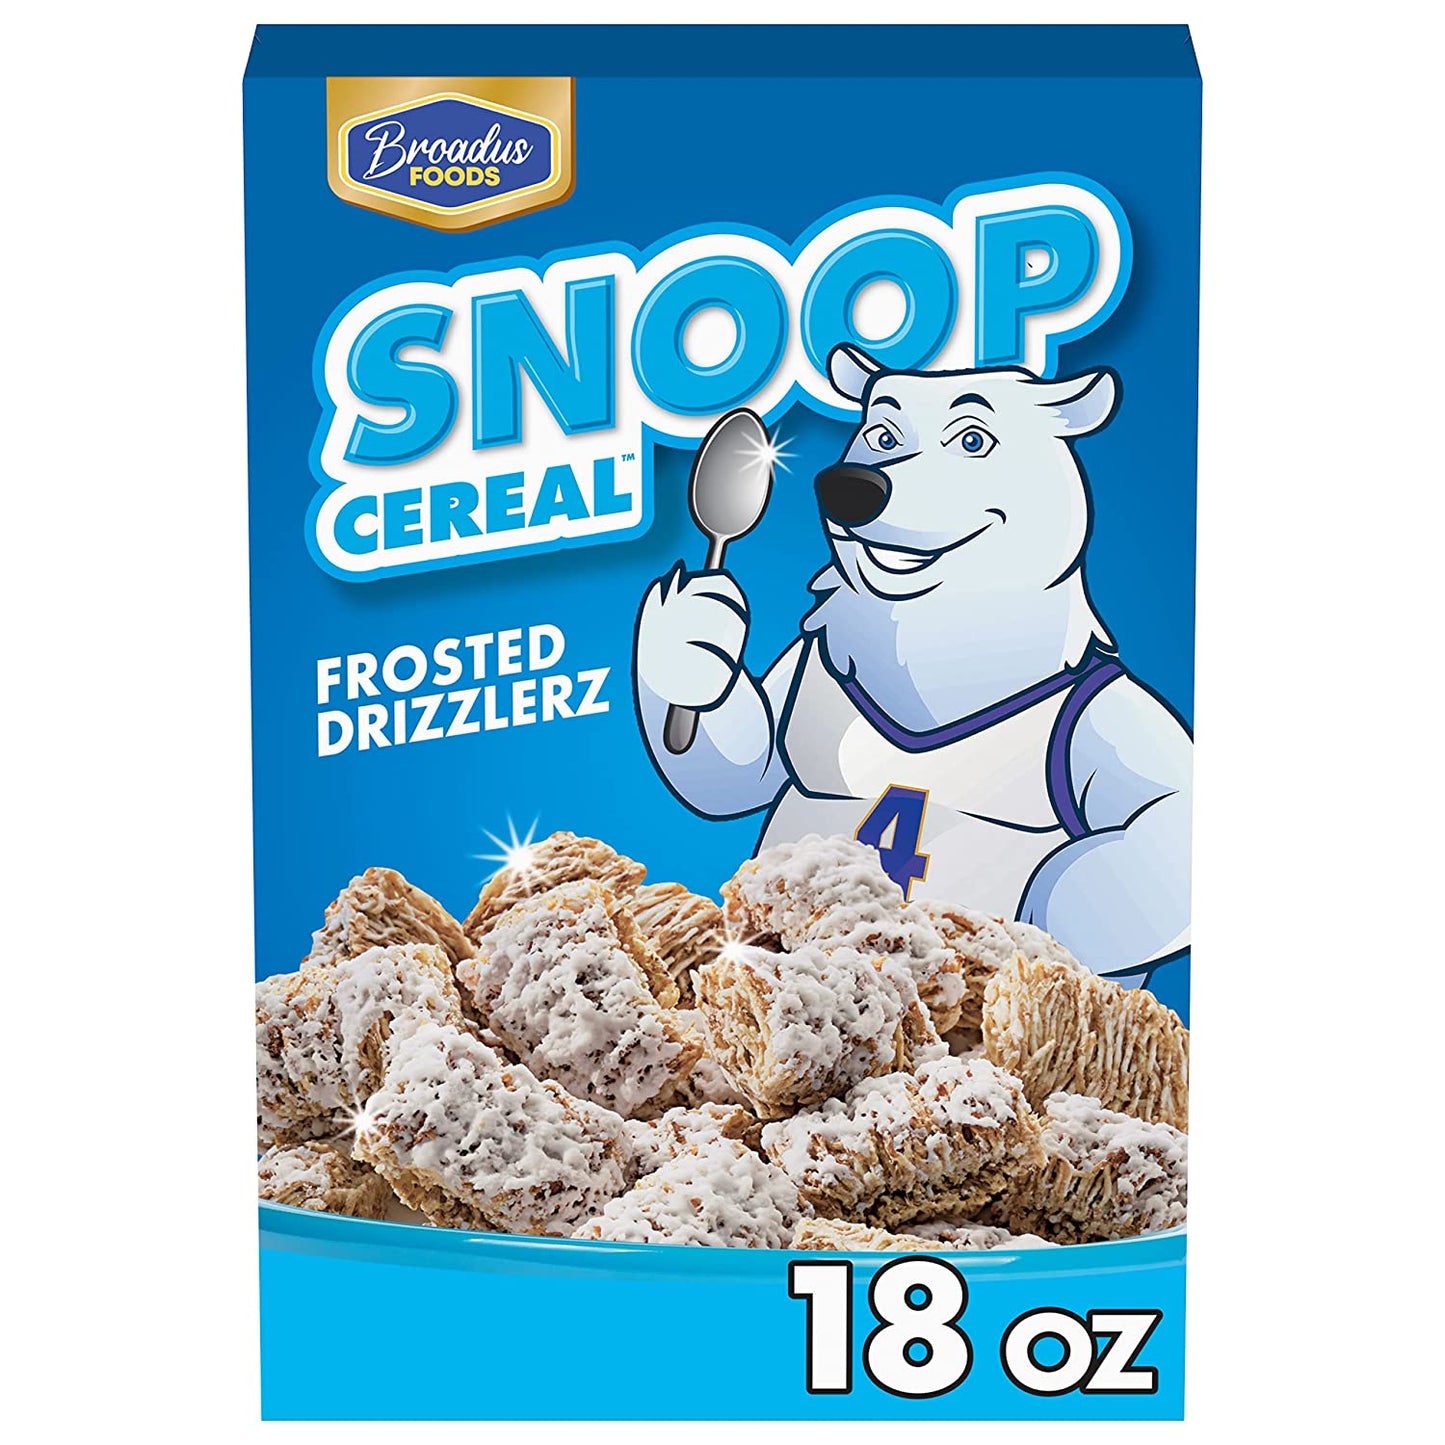 Snoop Cereal™ Frosted Drizzlerz – WIC Eligible